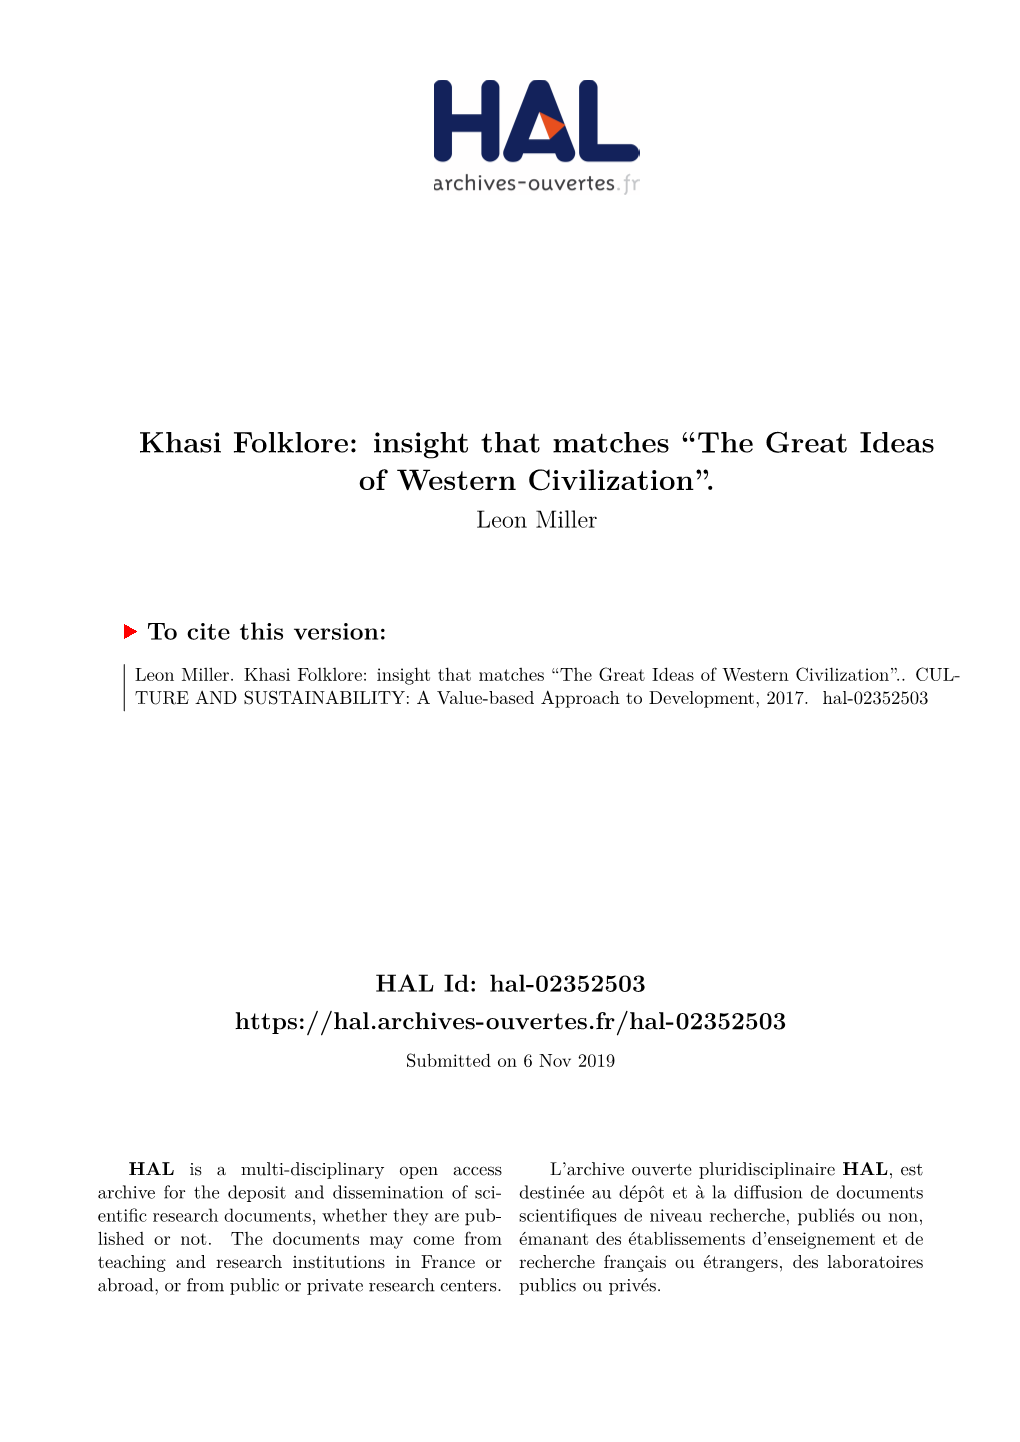 Khasi Folklore: Insight That Matches “The Great Ideas of Western Civilization”